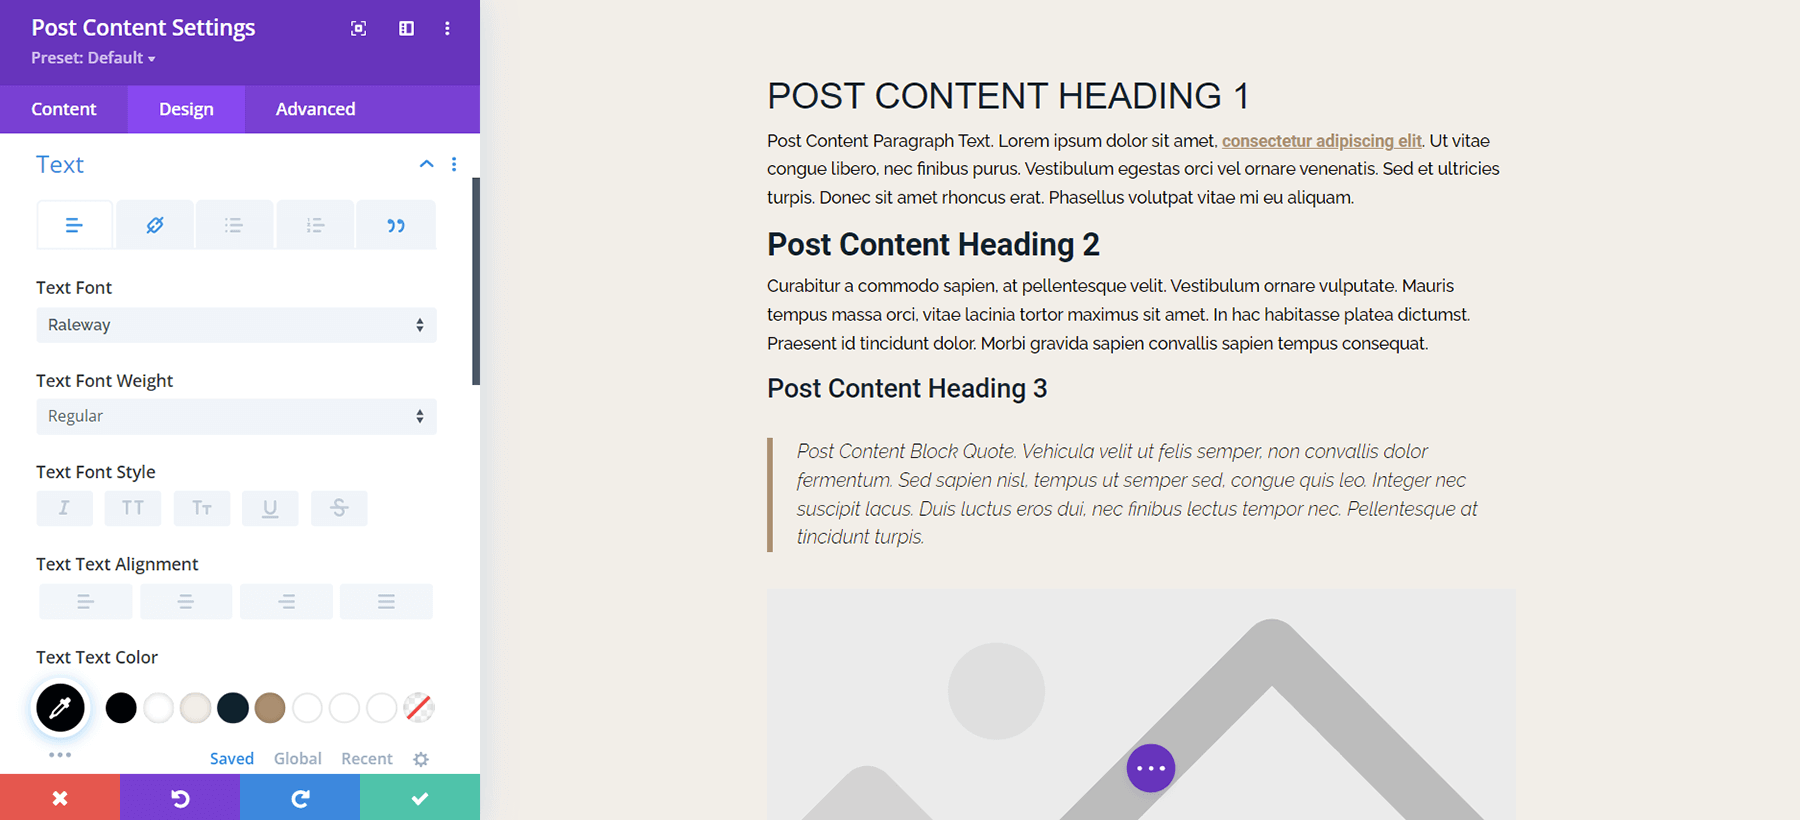 Update the Post Content Module with styling from your brand or business